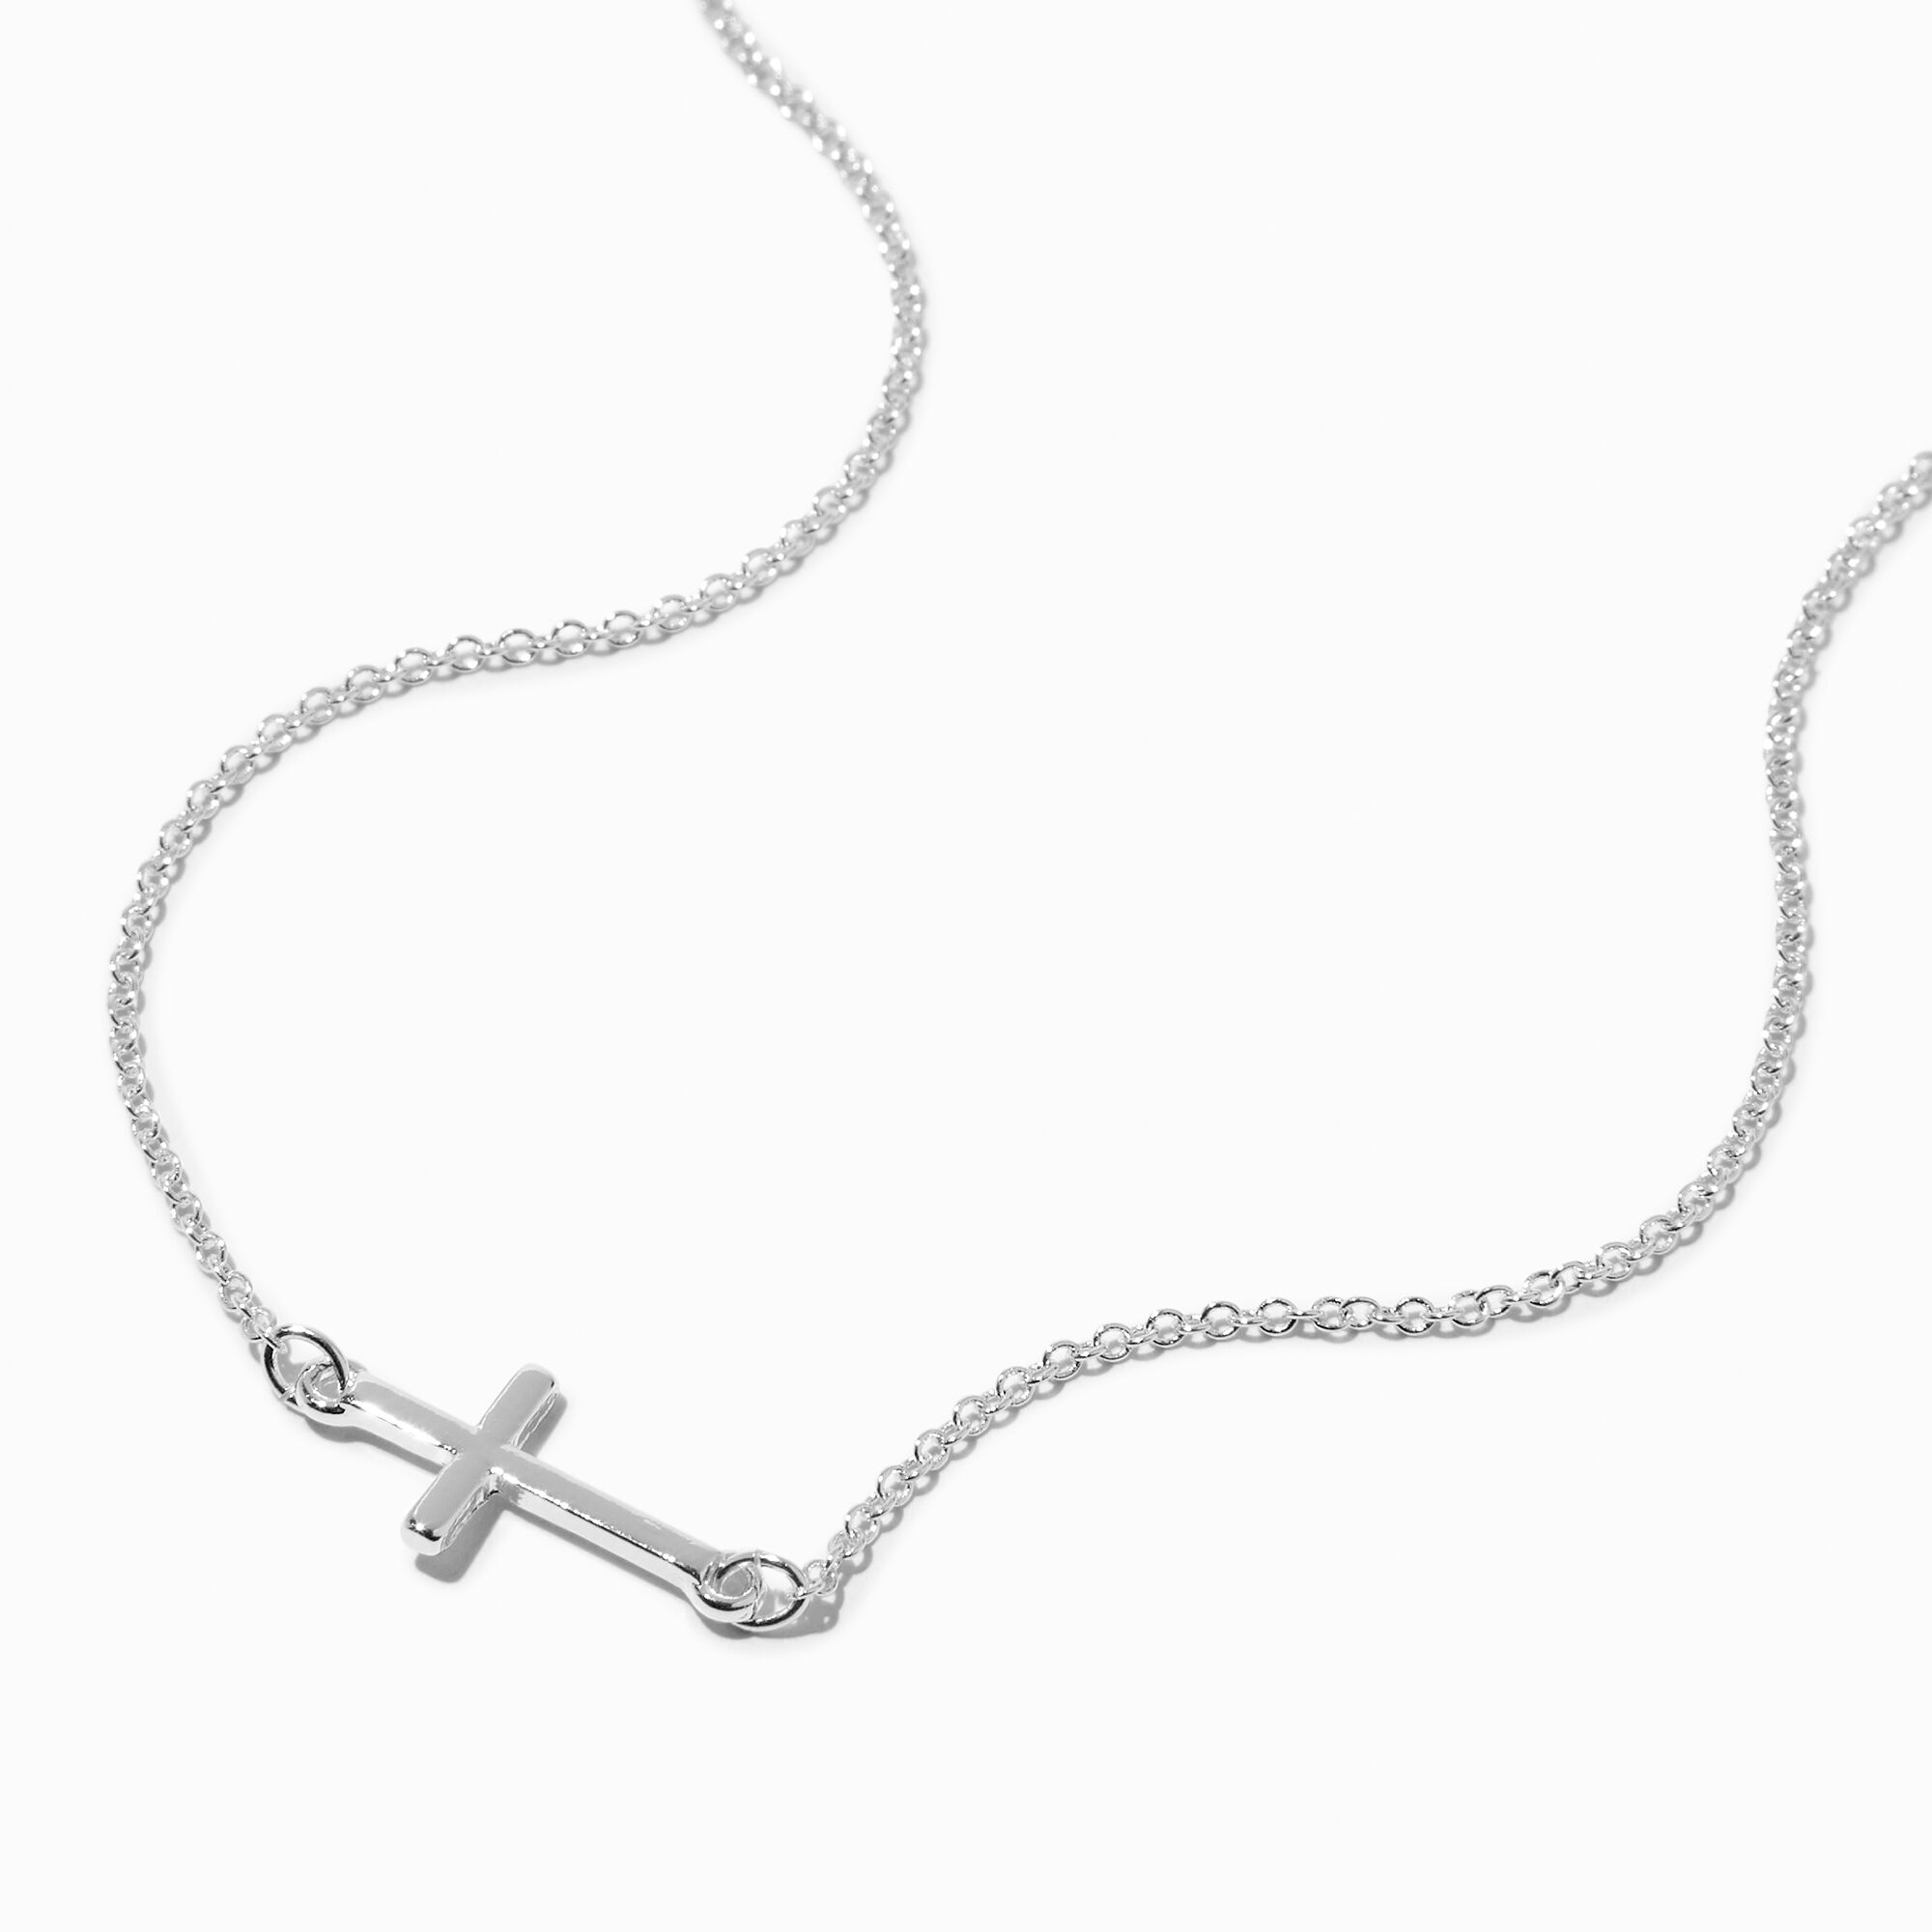 View Claires Recycled Jewelry Tone Cross Pendant Necklace Silver information